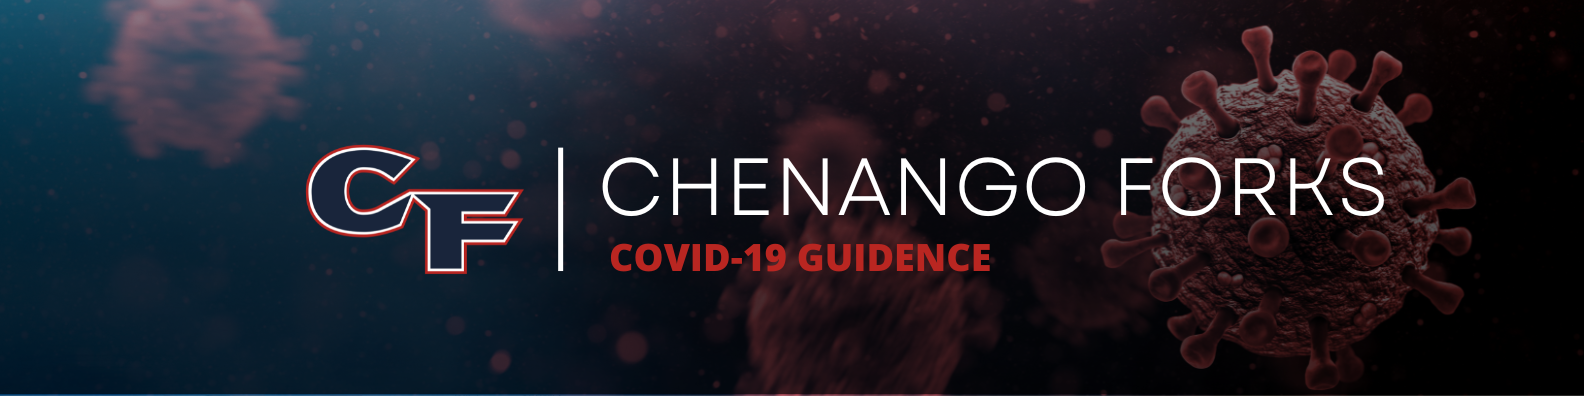 COVID-19 Guidence